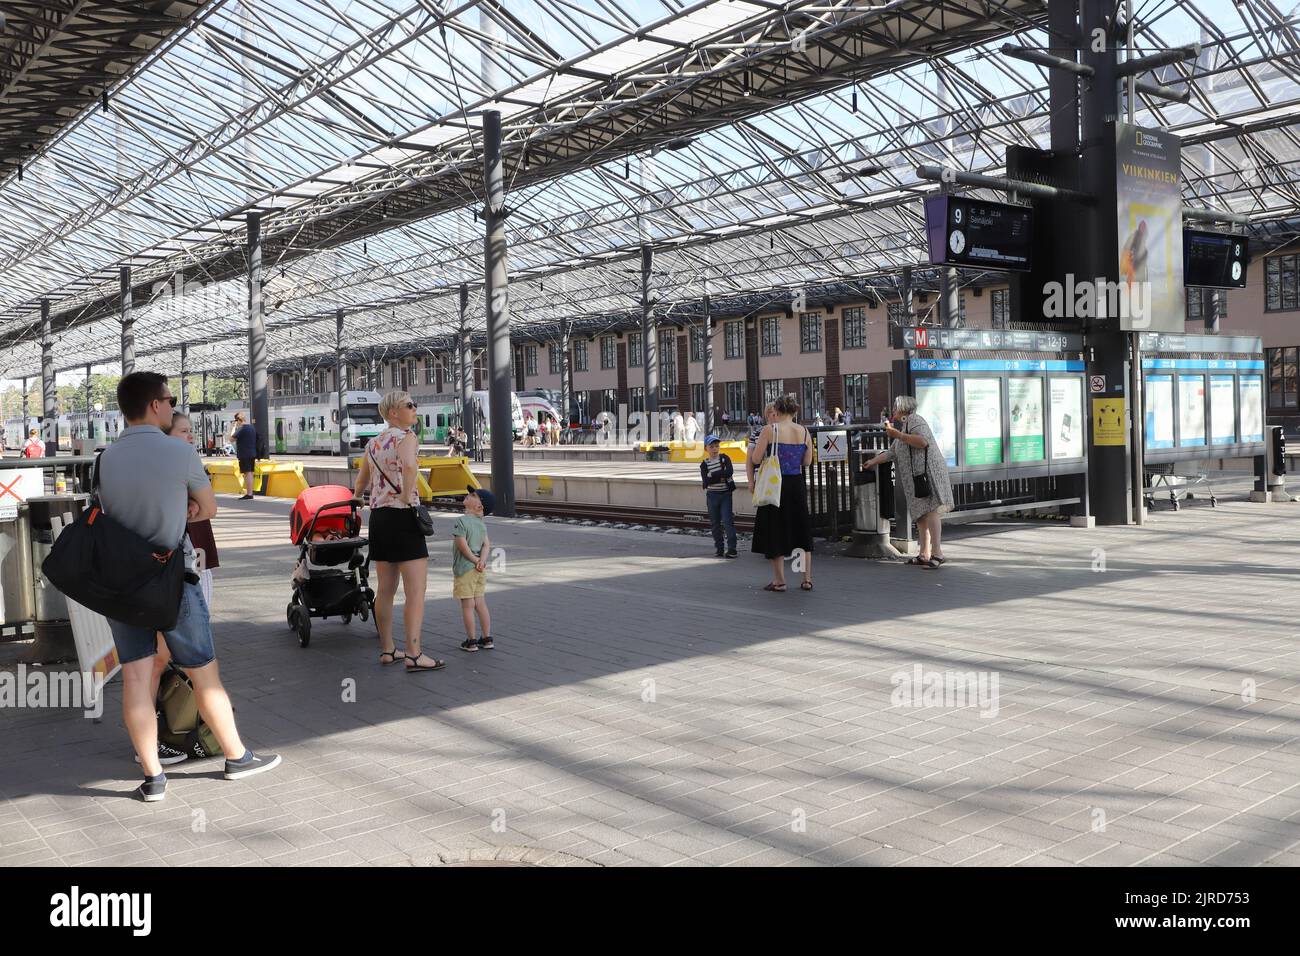 Helsinki, Finland - August 20, 2022: View of the platform area with waiting passengers at the Helsinki central railroad station. Stock Photo